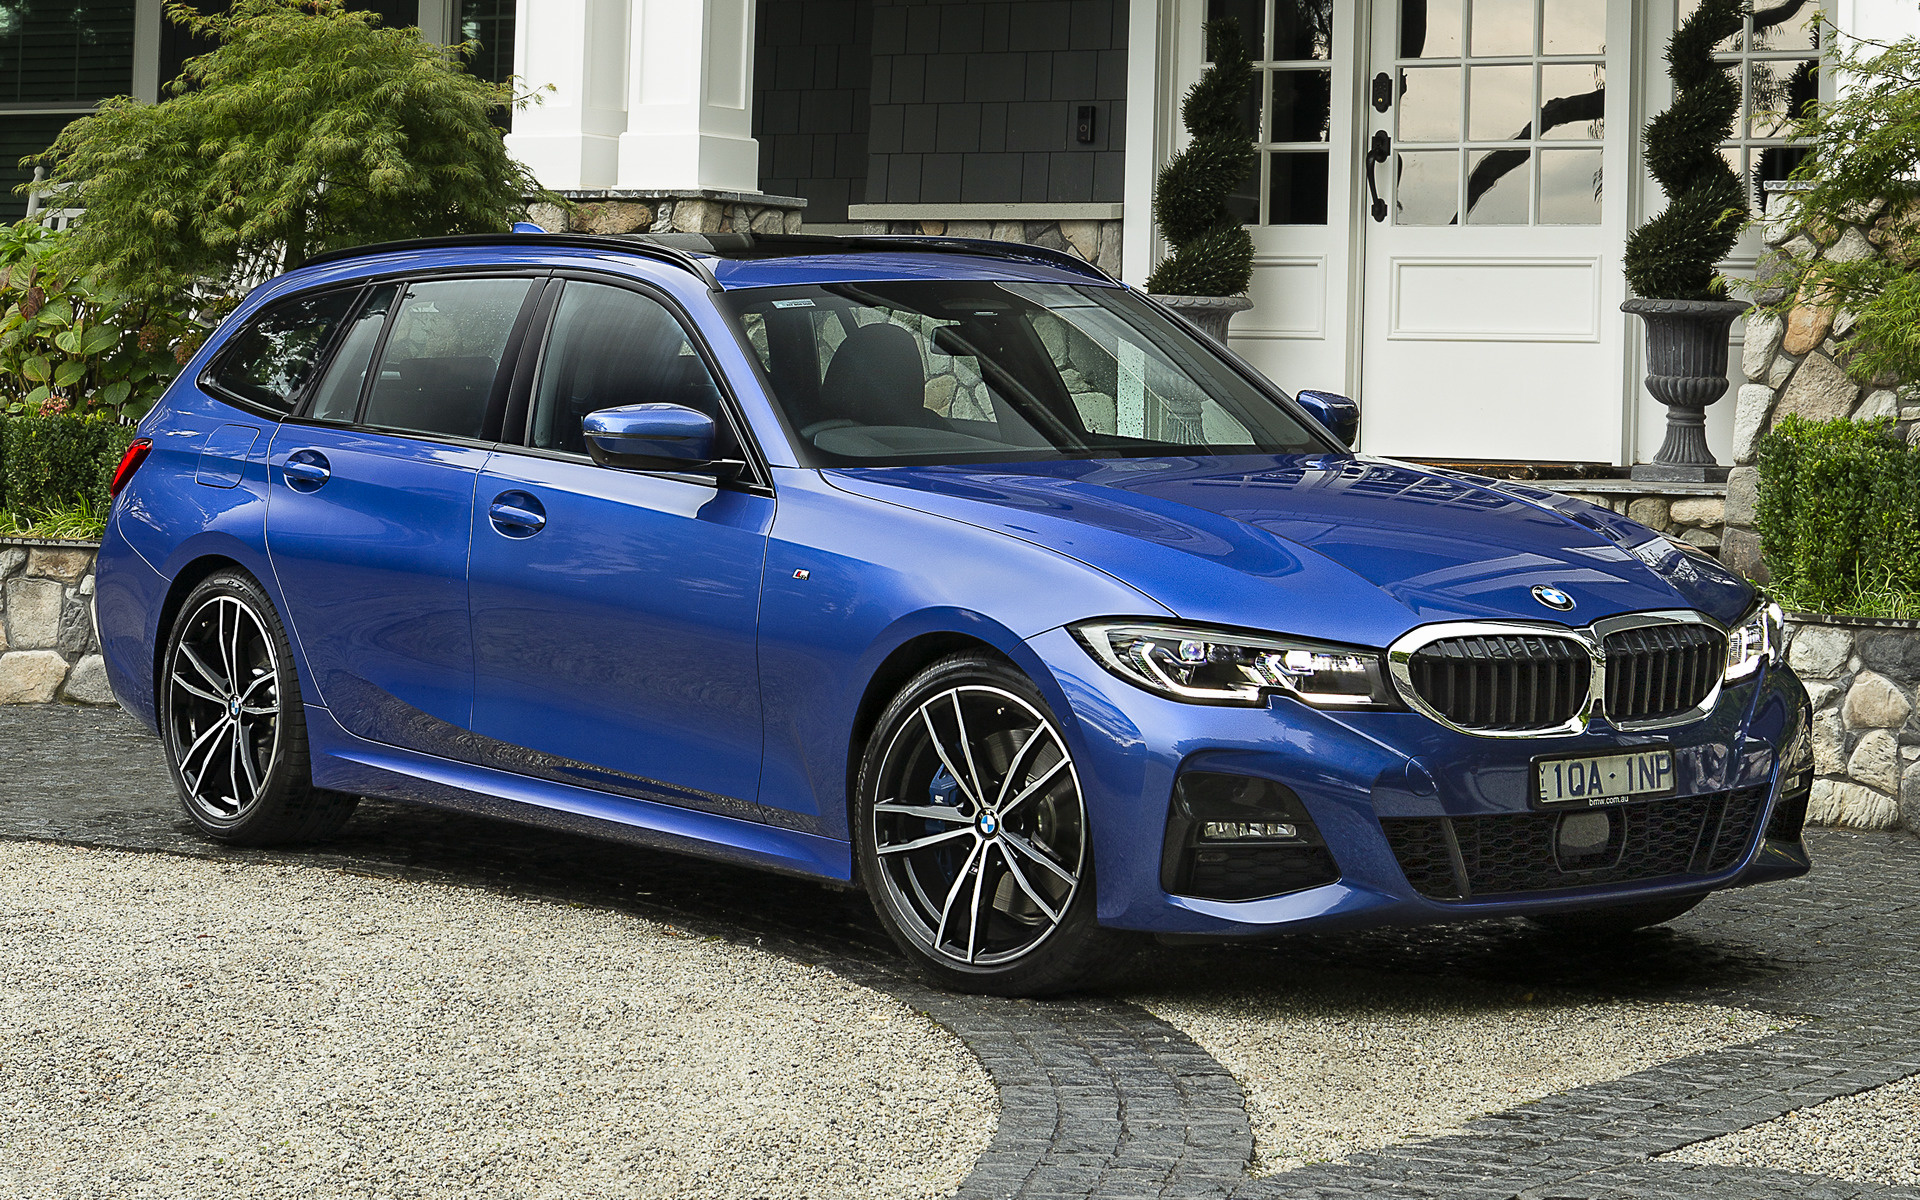 2020 BMW 3 Series Touring M Sport (AU) Wallpapers and HD